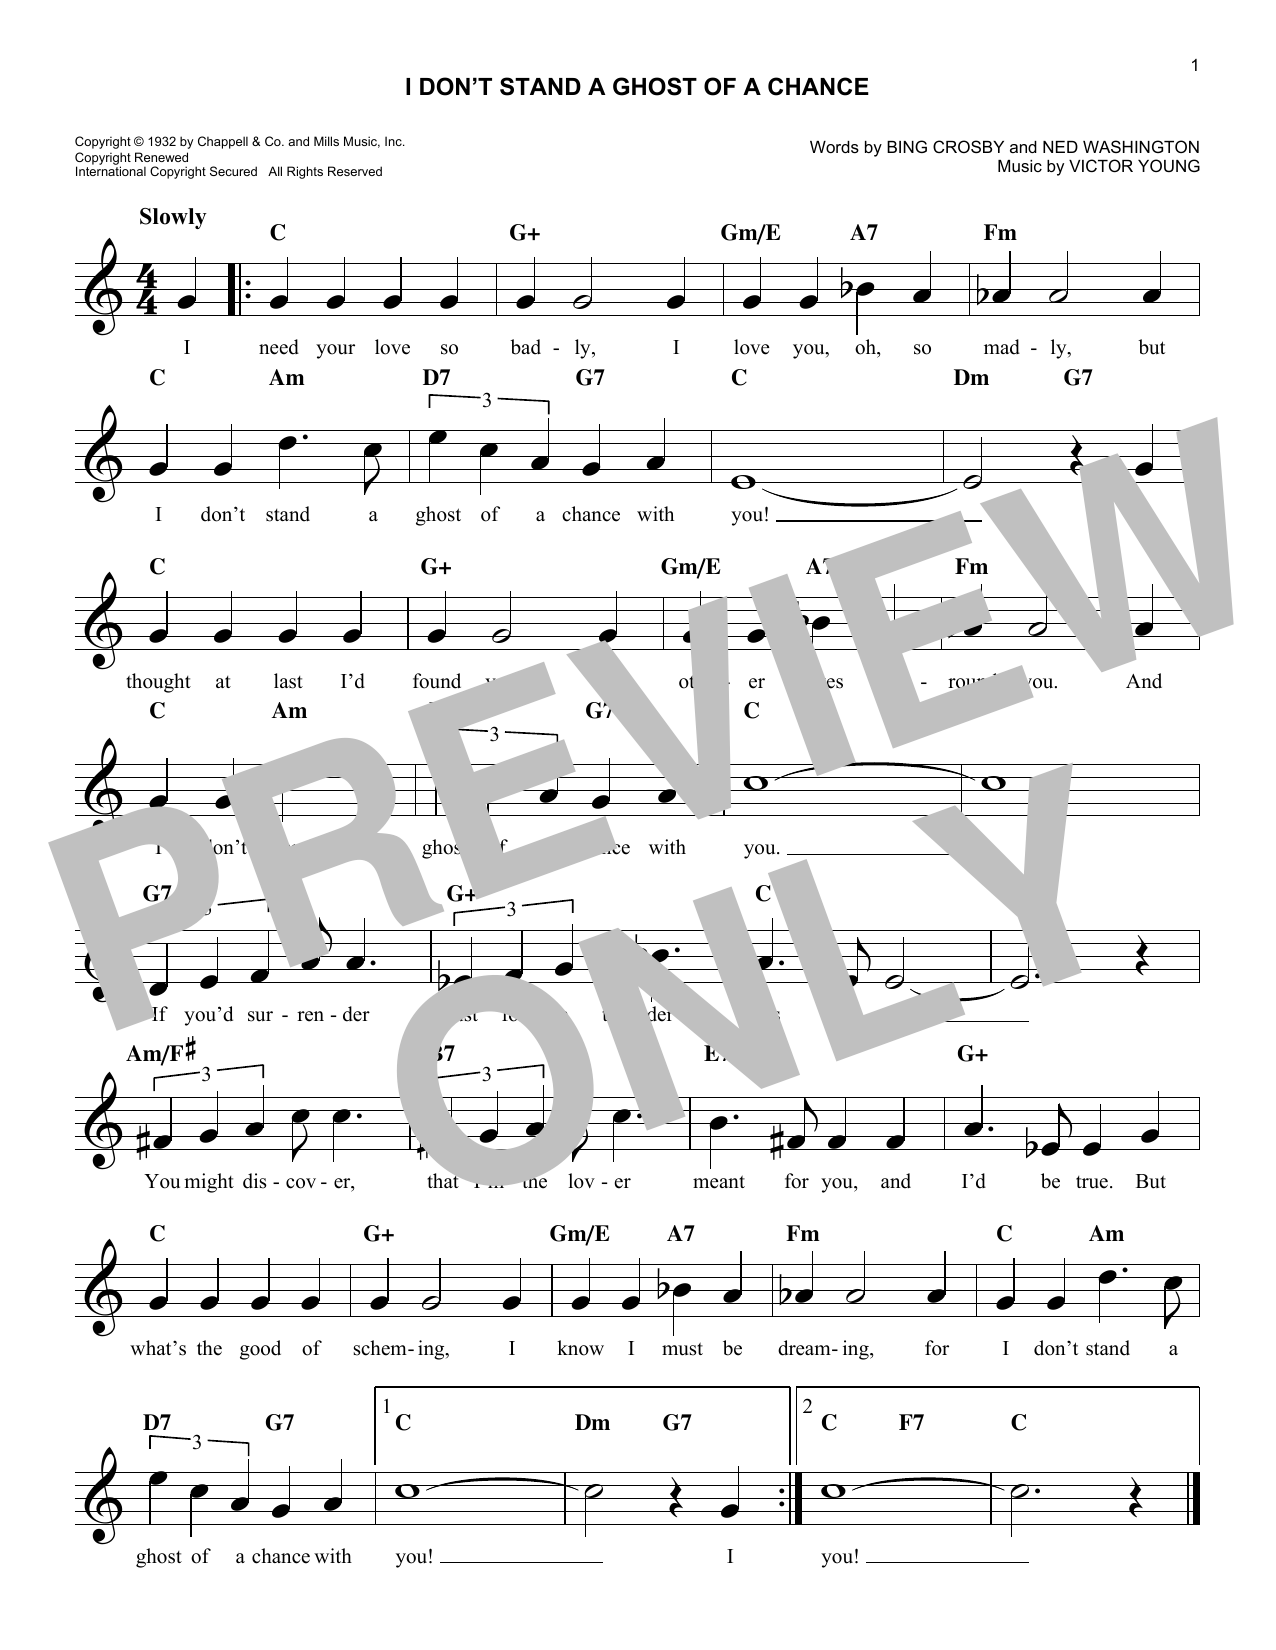 Download Ned Washington I Don't Stand A Ghost Of A Chance With Sheet Music